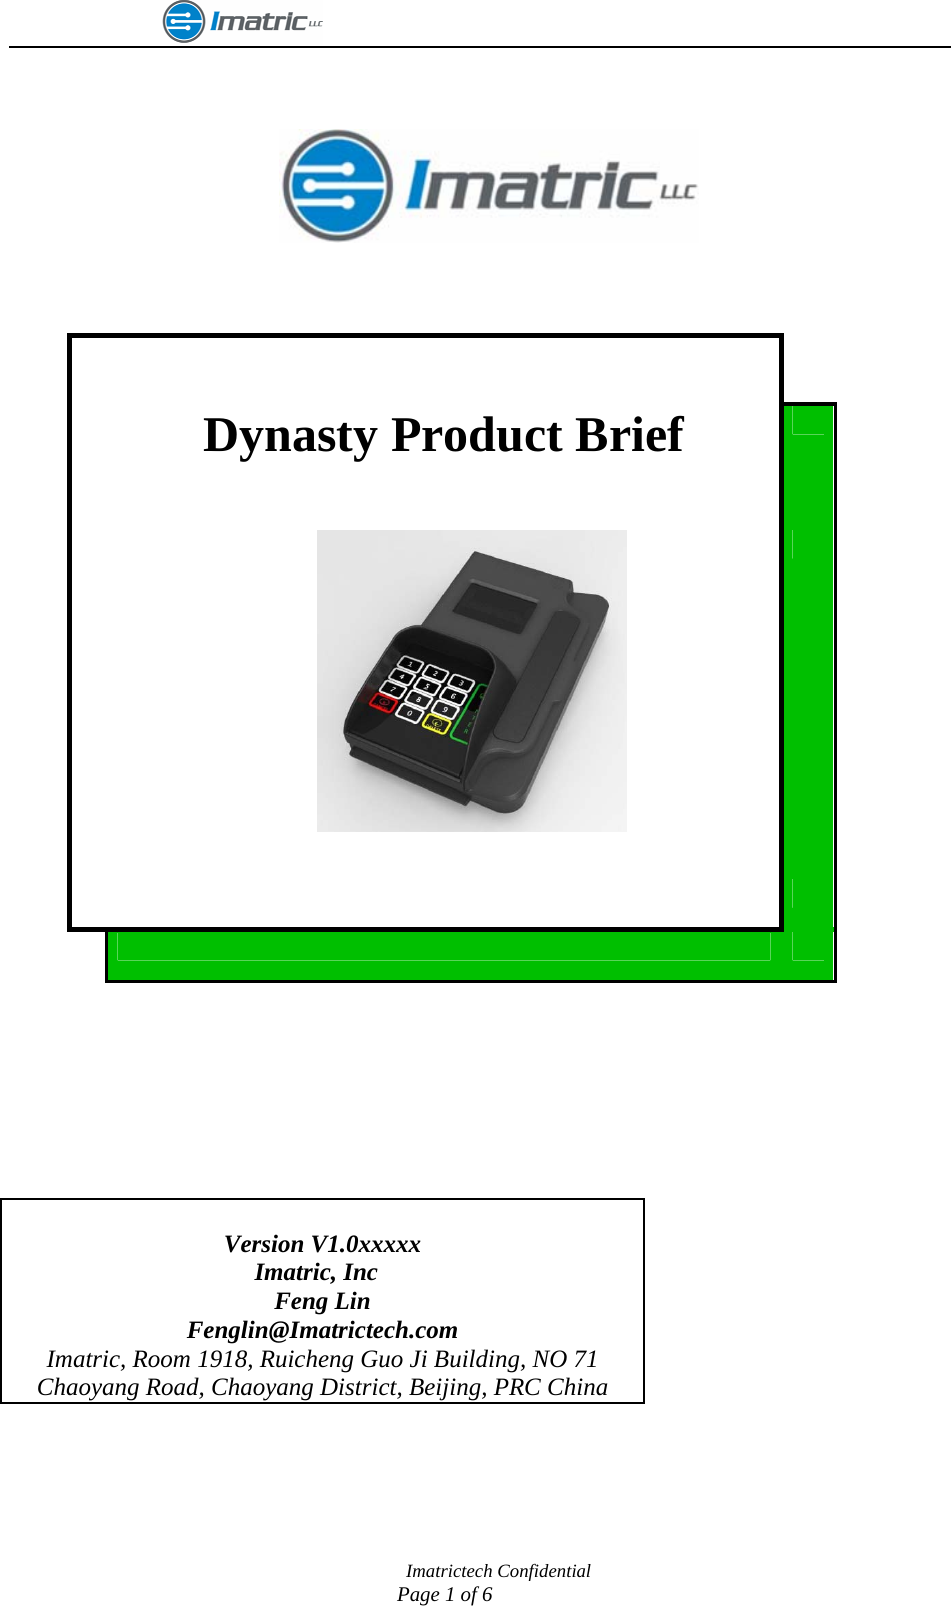                                                               Imatrictech Confidential                             Page 1 of 6                                            Dynasty Product Brief                          Version V1.0xxxxx Imatric, Inc  Feng Lin Fenglin@Imatrictech.com Imatric, Room 1918, Ruicheng Guo Ji Building, NO 71 Chaoyang Road, Chaoyang District, Beijing, PRC China 